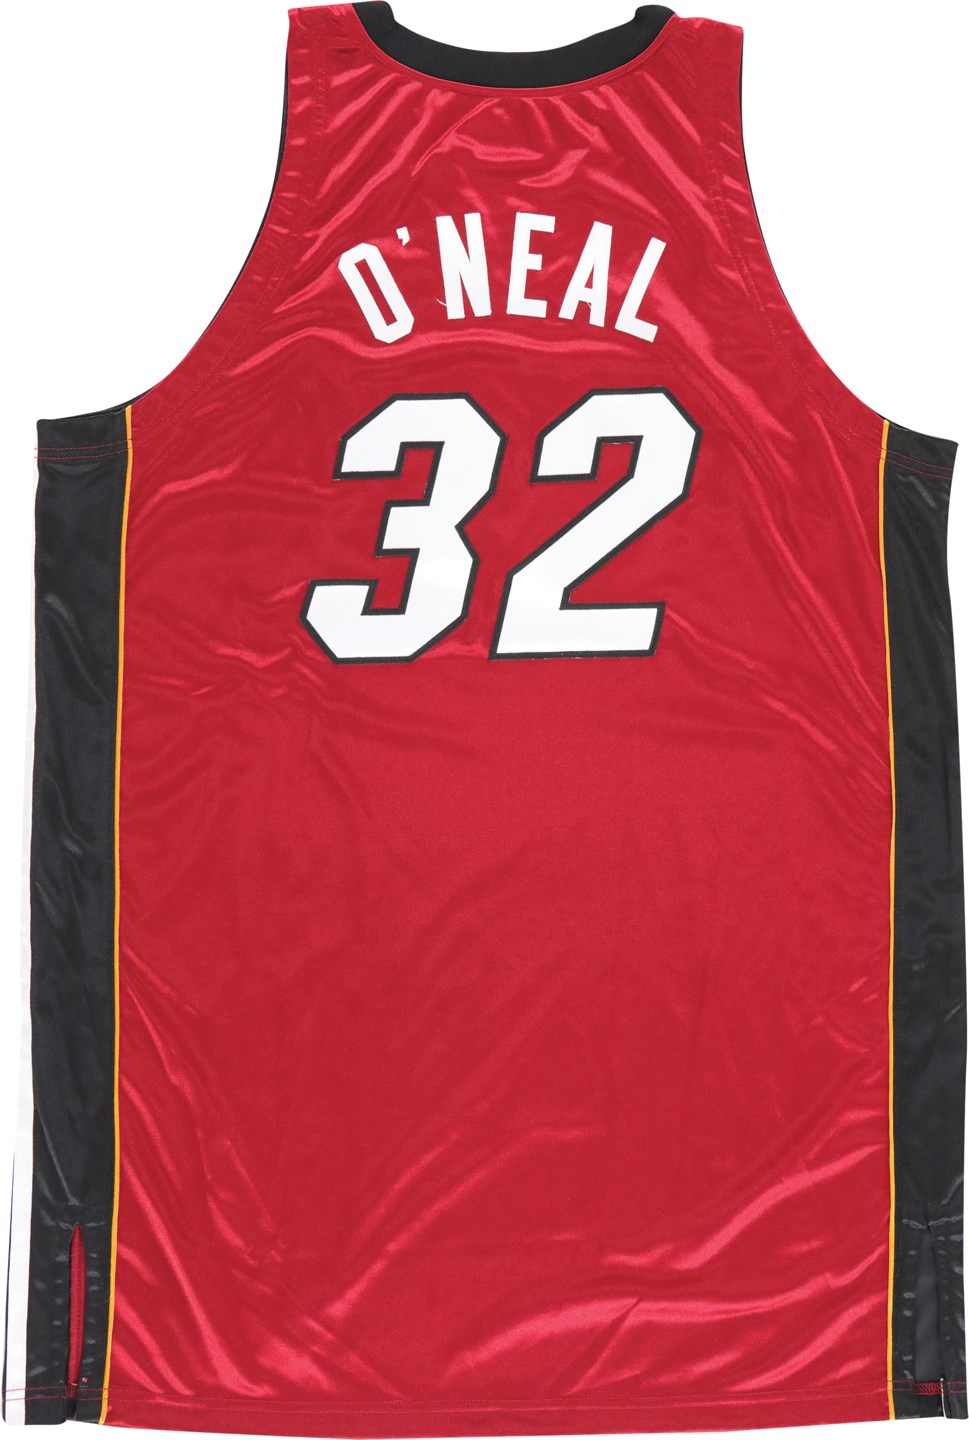 Basketball - 2004-05 Shaquille O'Neal Miami Heat Game Worn Jersey